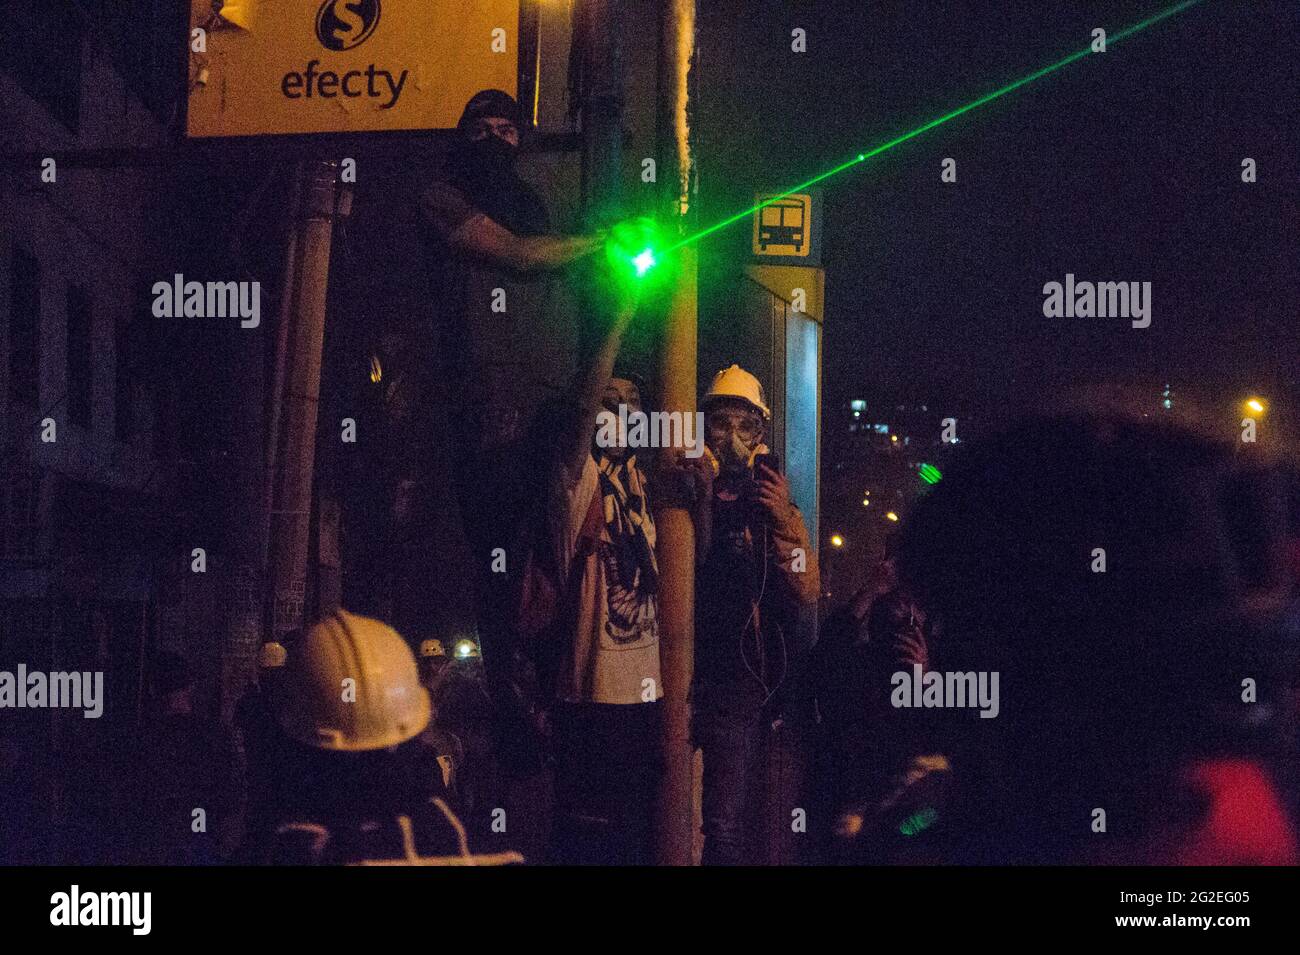 Clashes and unrest between demonstrators using molotov bombs, rocks and lasers with Colombia's riot police as houndreds flooded the streets of medellin in an anti-government protest against the president Ivan Duque, Police Brutality and inequalities, on June 9, 2021, in Medellin, Colombia Stock Photo